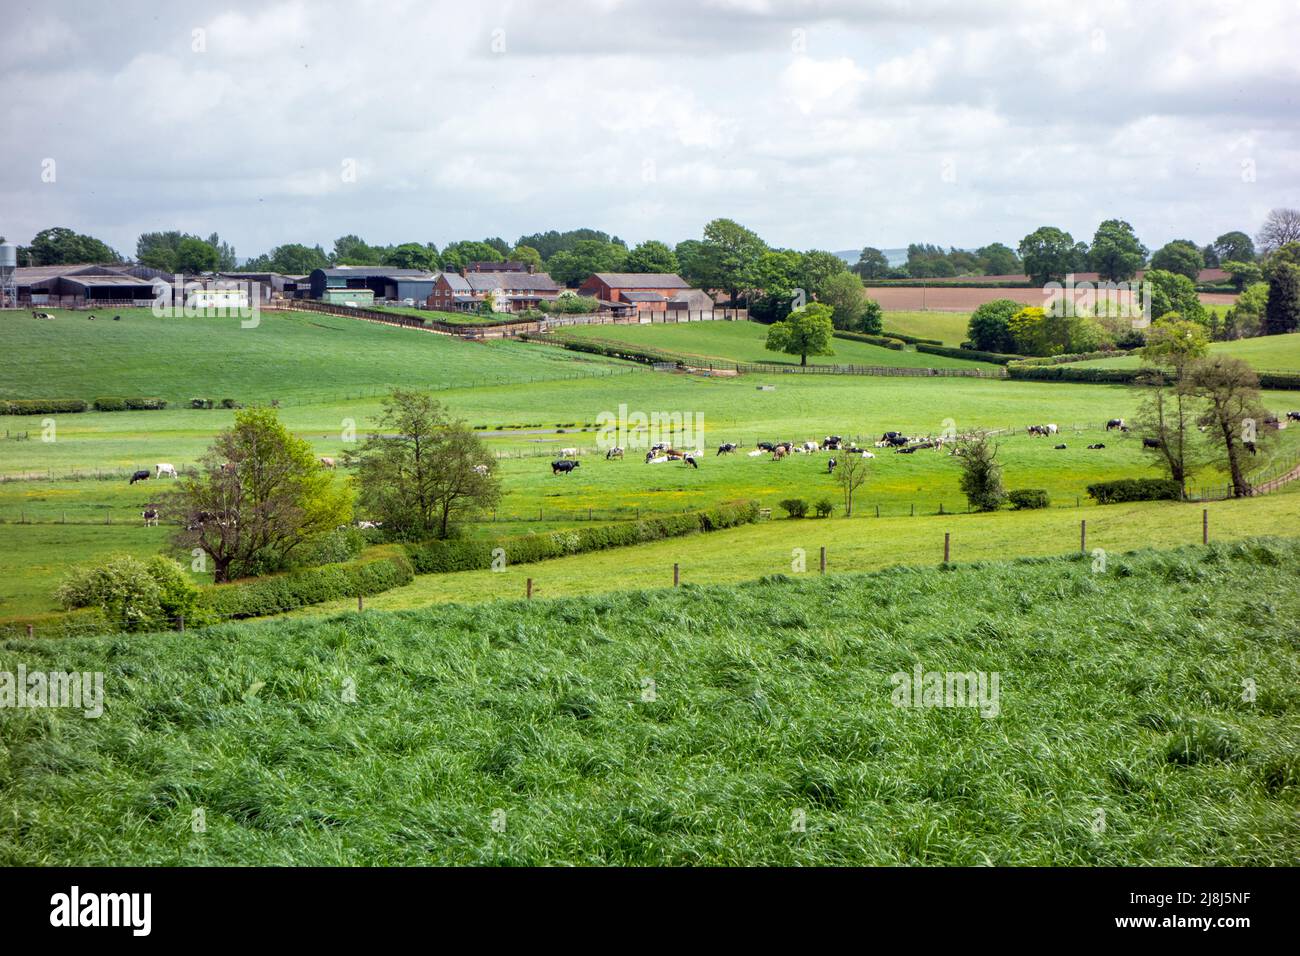 Herd of dairy cows cattle in  the rolling Cheshire farmland  countryside landscape Sandbach England UK Stock Photo